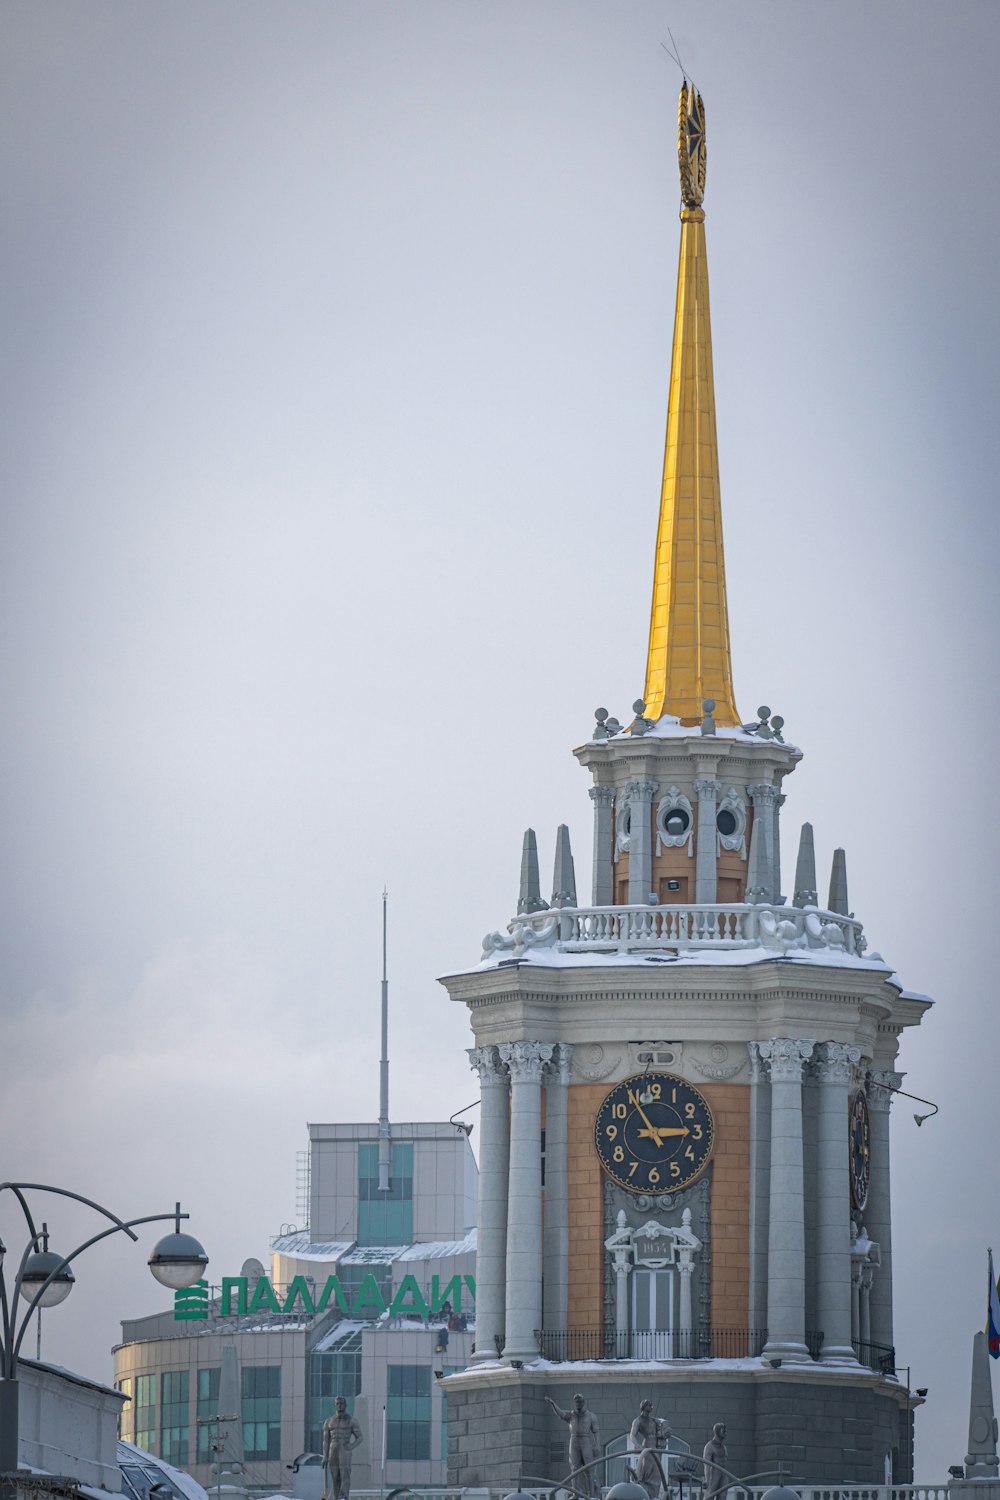 a clock tower with a gold spire on top of it